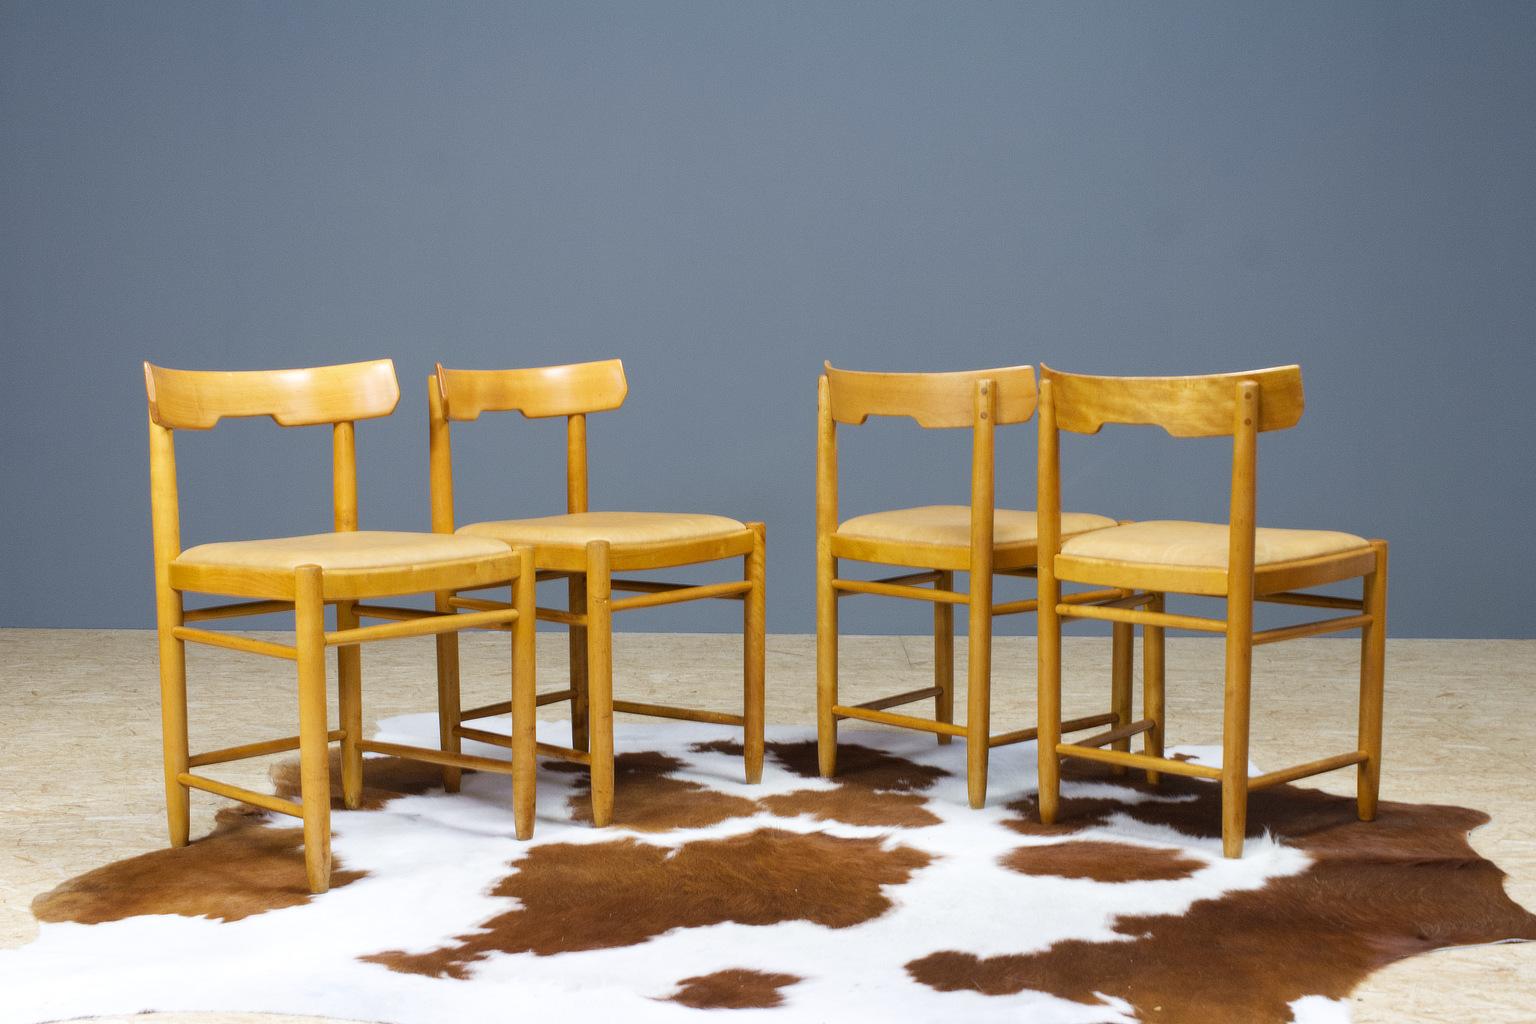 Danish Scandinavian Modern Dining Chairs in Beech and Tan Leather, 1960s Set of 4 For Sale